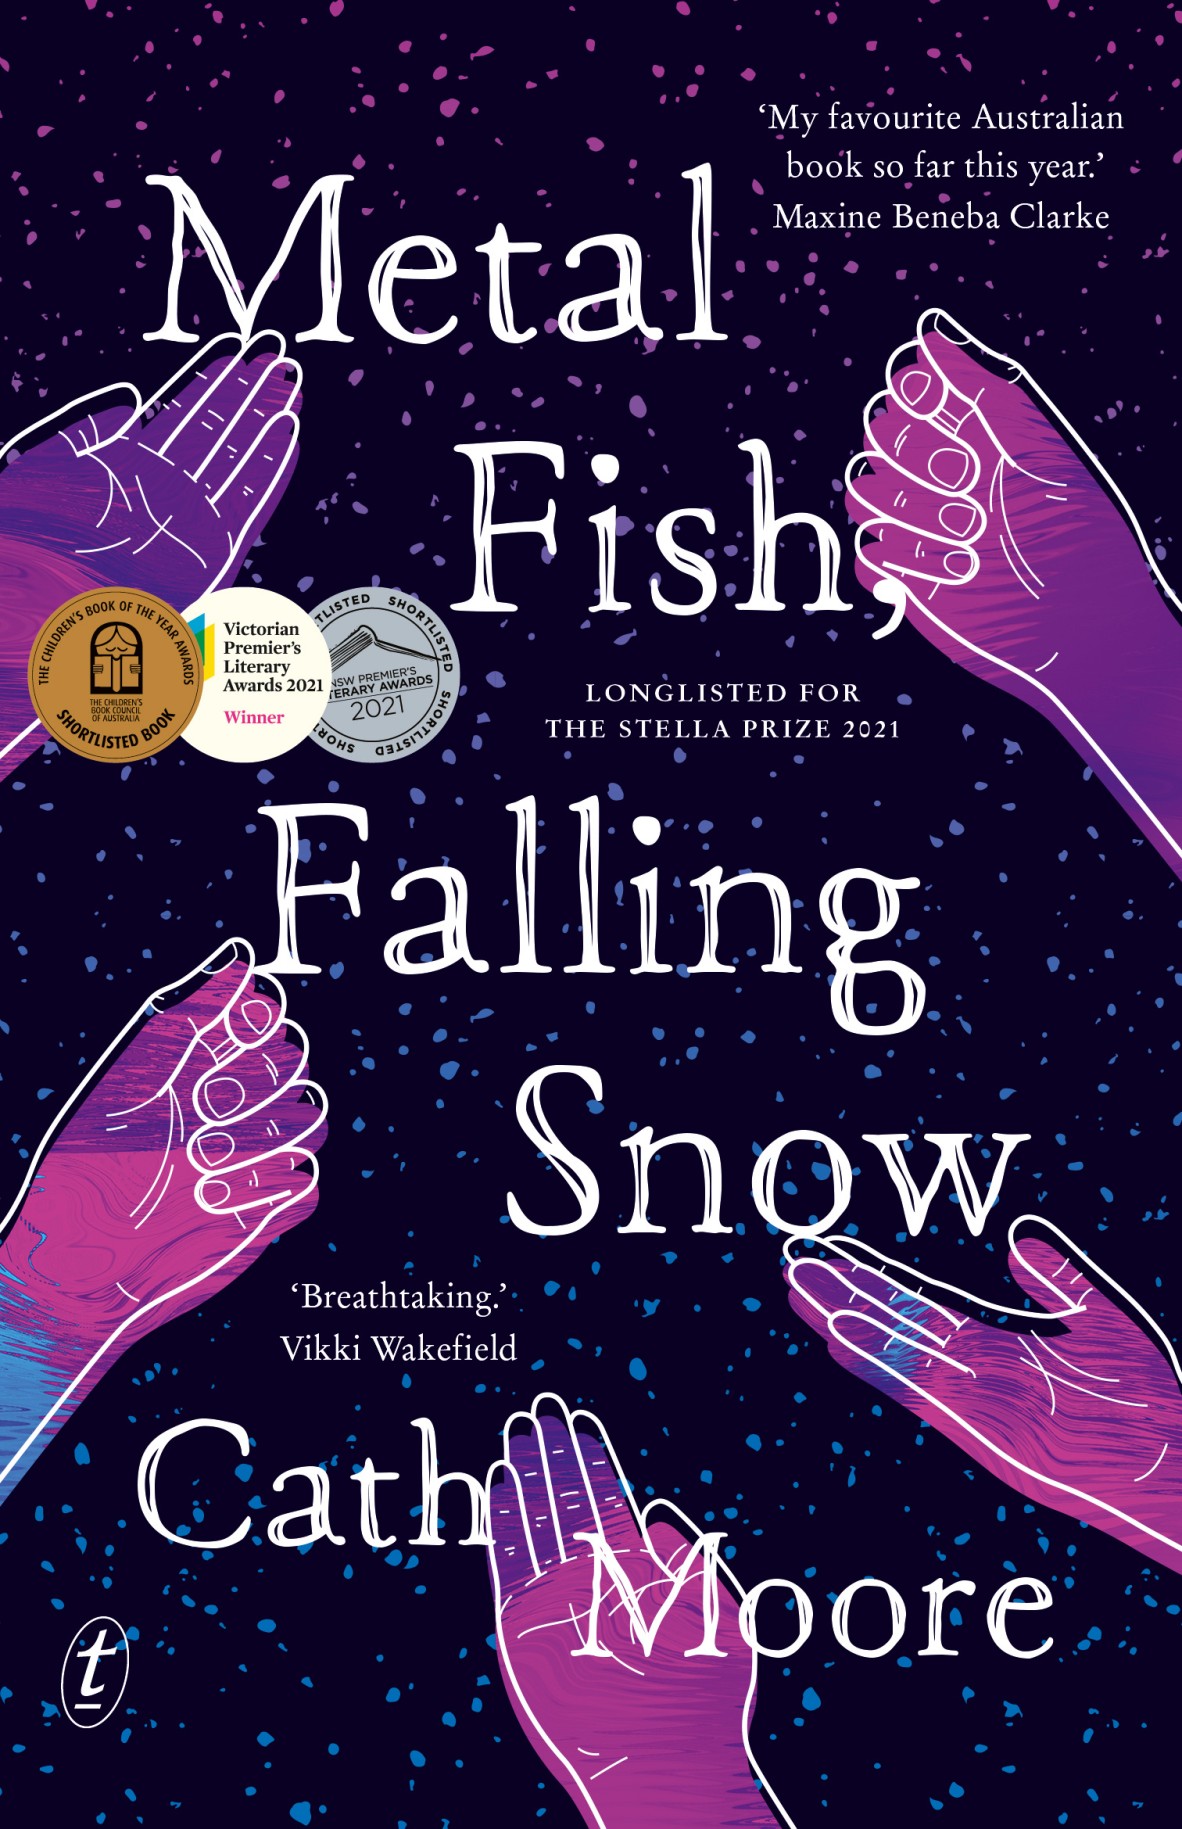 Metal Fish Falling Snow by Cath Moore Text Publishing